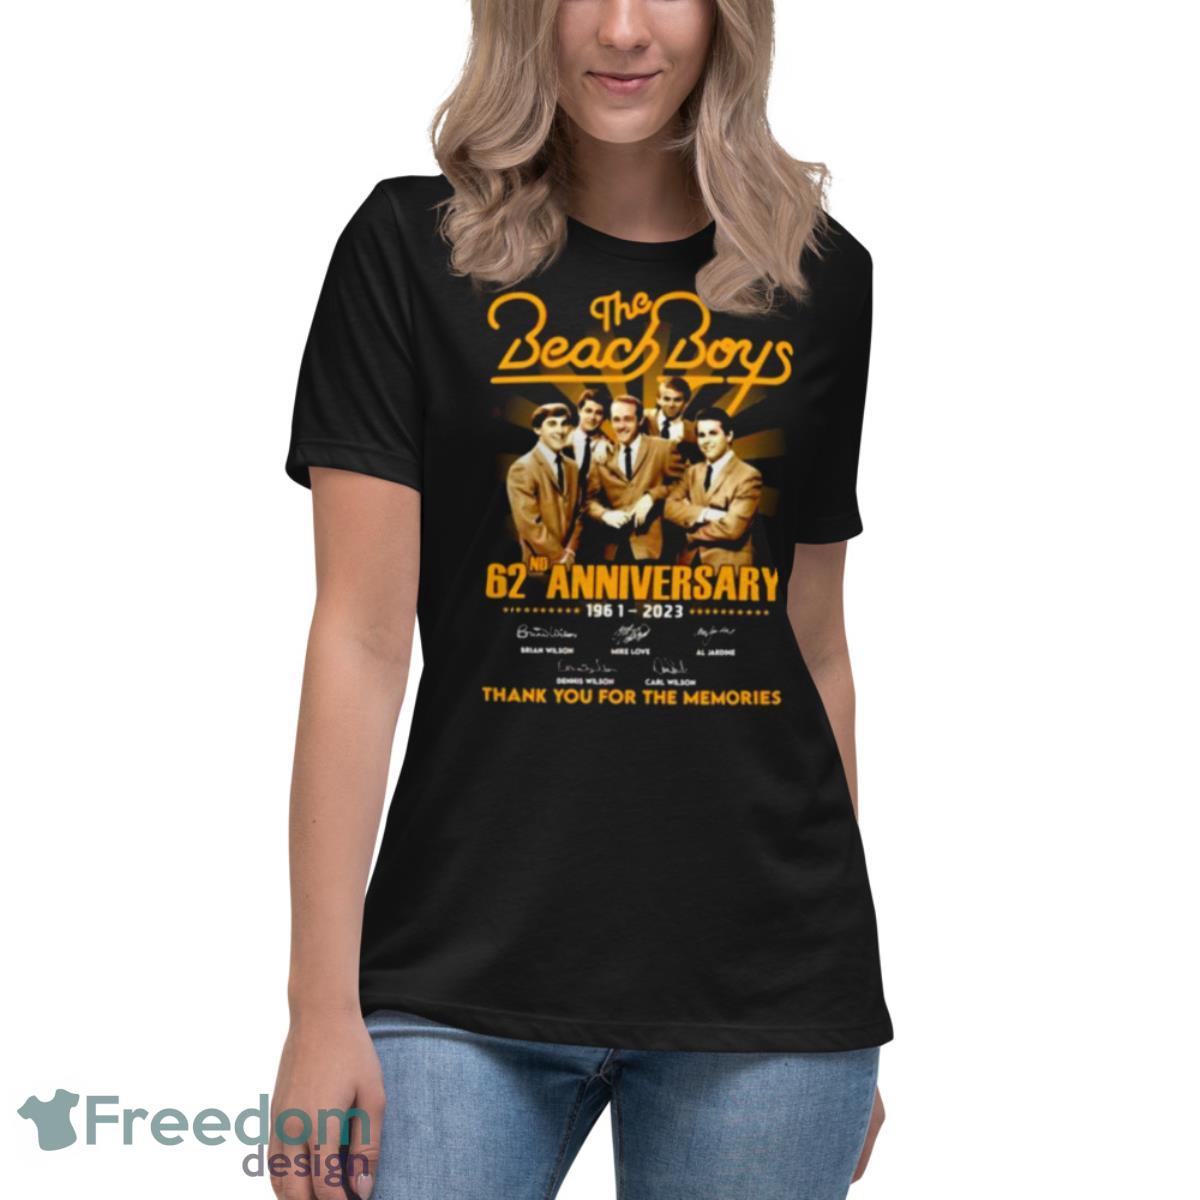 The Beach Boys 62nd Anniversary 1961 – 2023 Thank You For The Memories Signatures Shirt